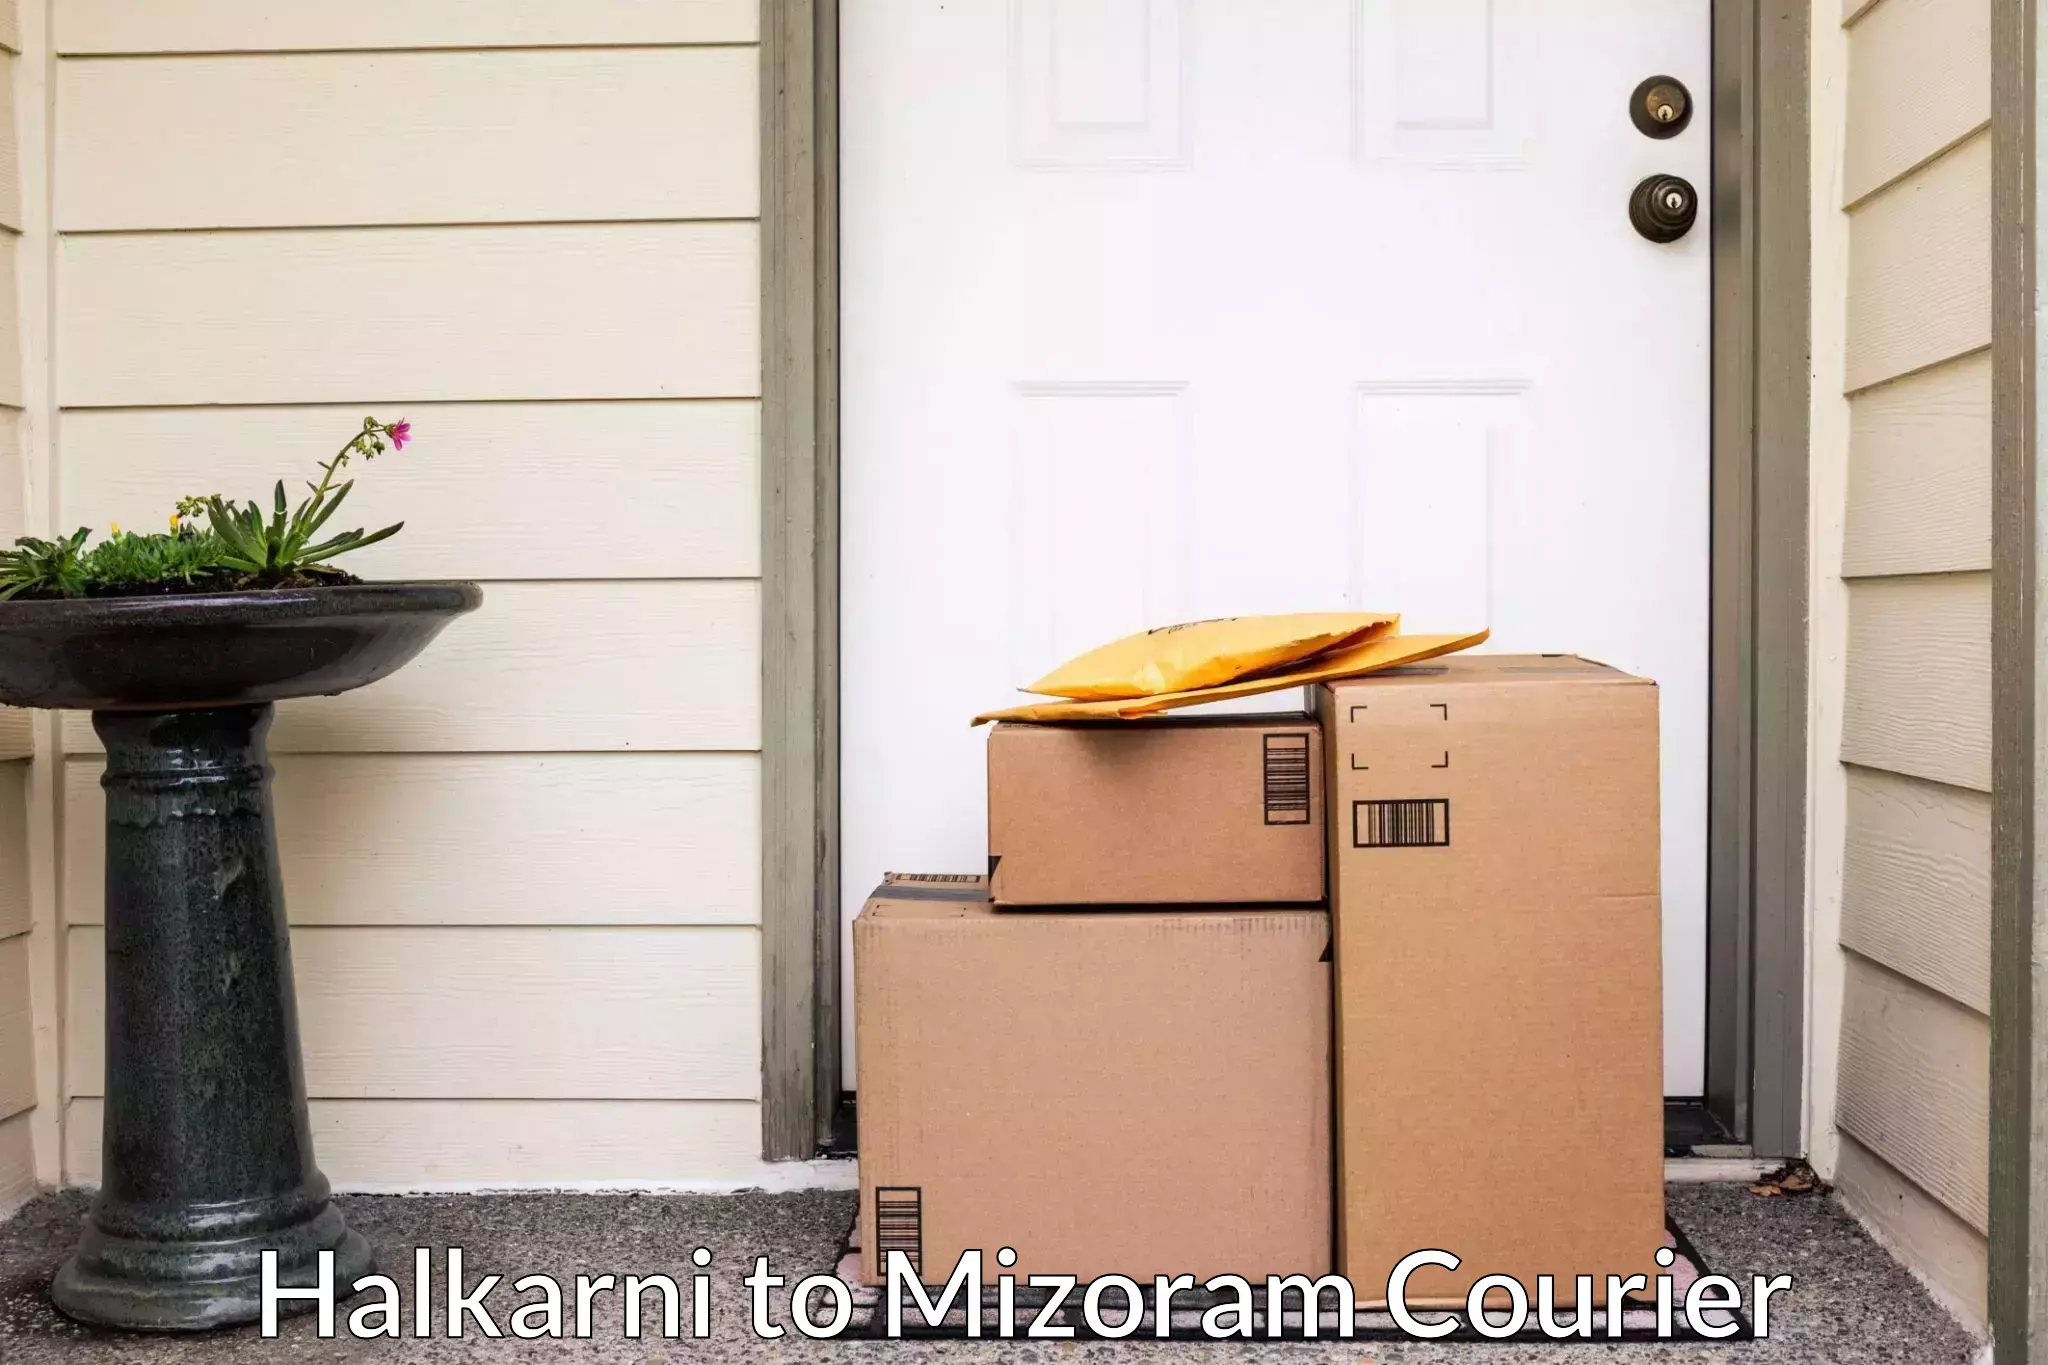 Trusted relocation experts Halkarni to Darlawn